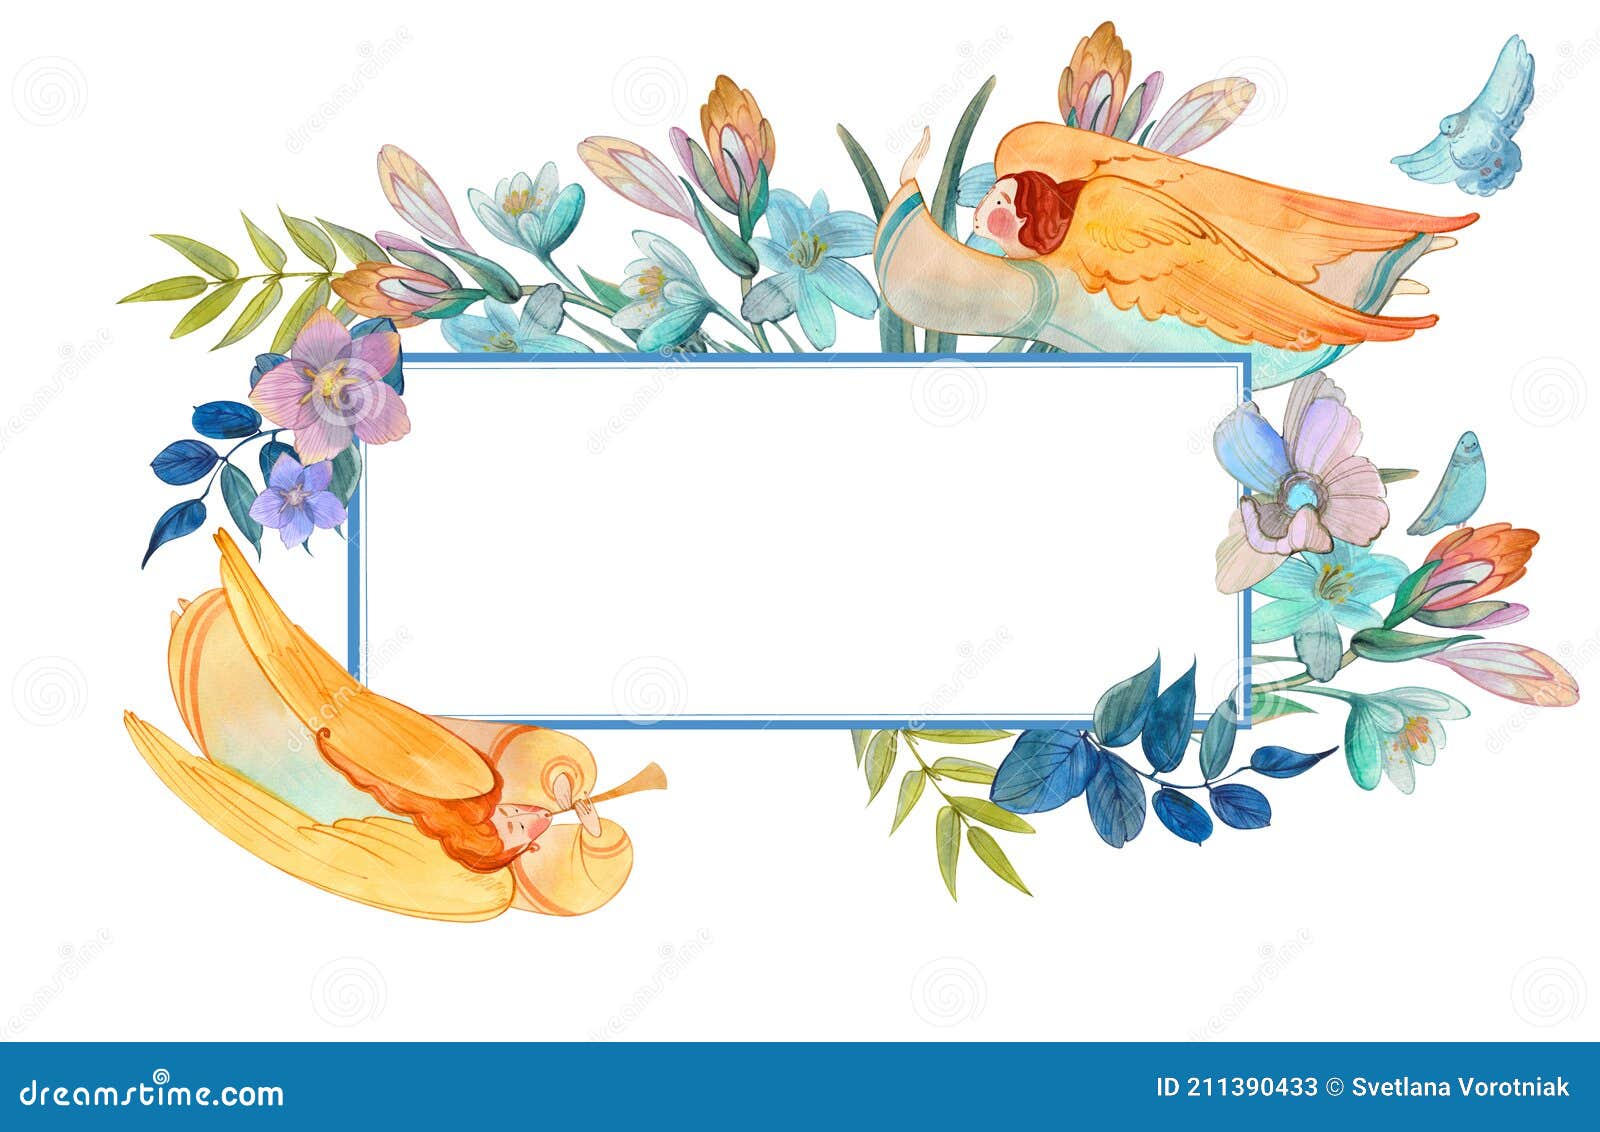 rectangular asymmetric frame with angels and flowers. hand drawn watercolor.